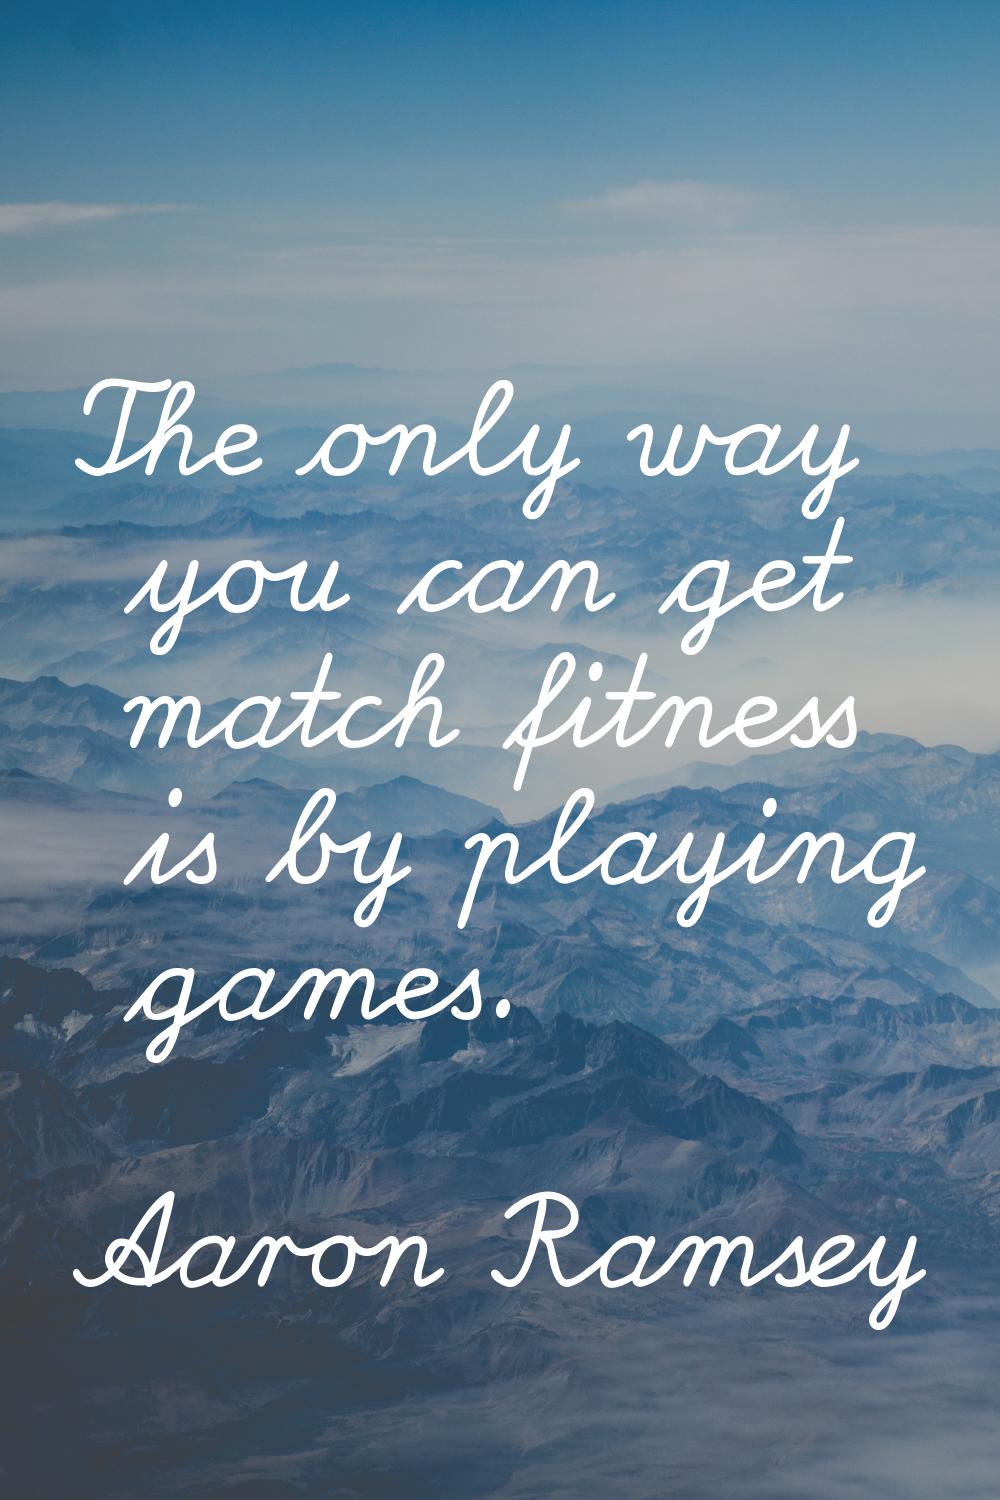 The only way you can get match fitness is by playing games.